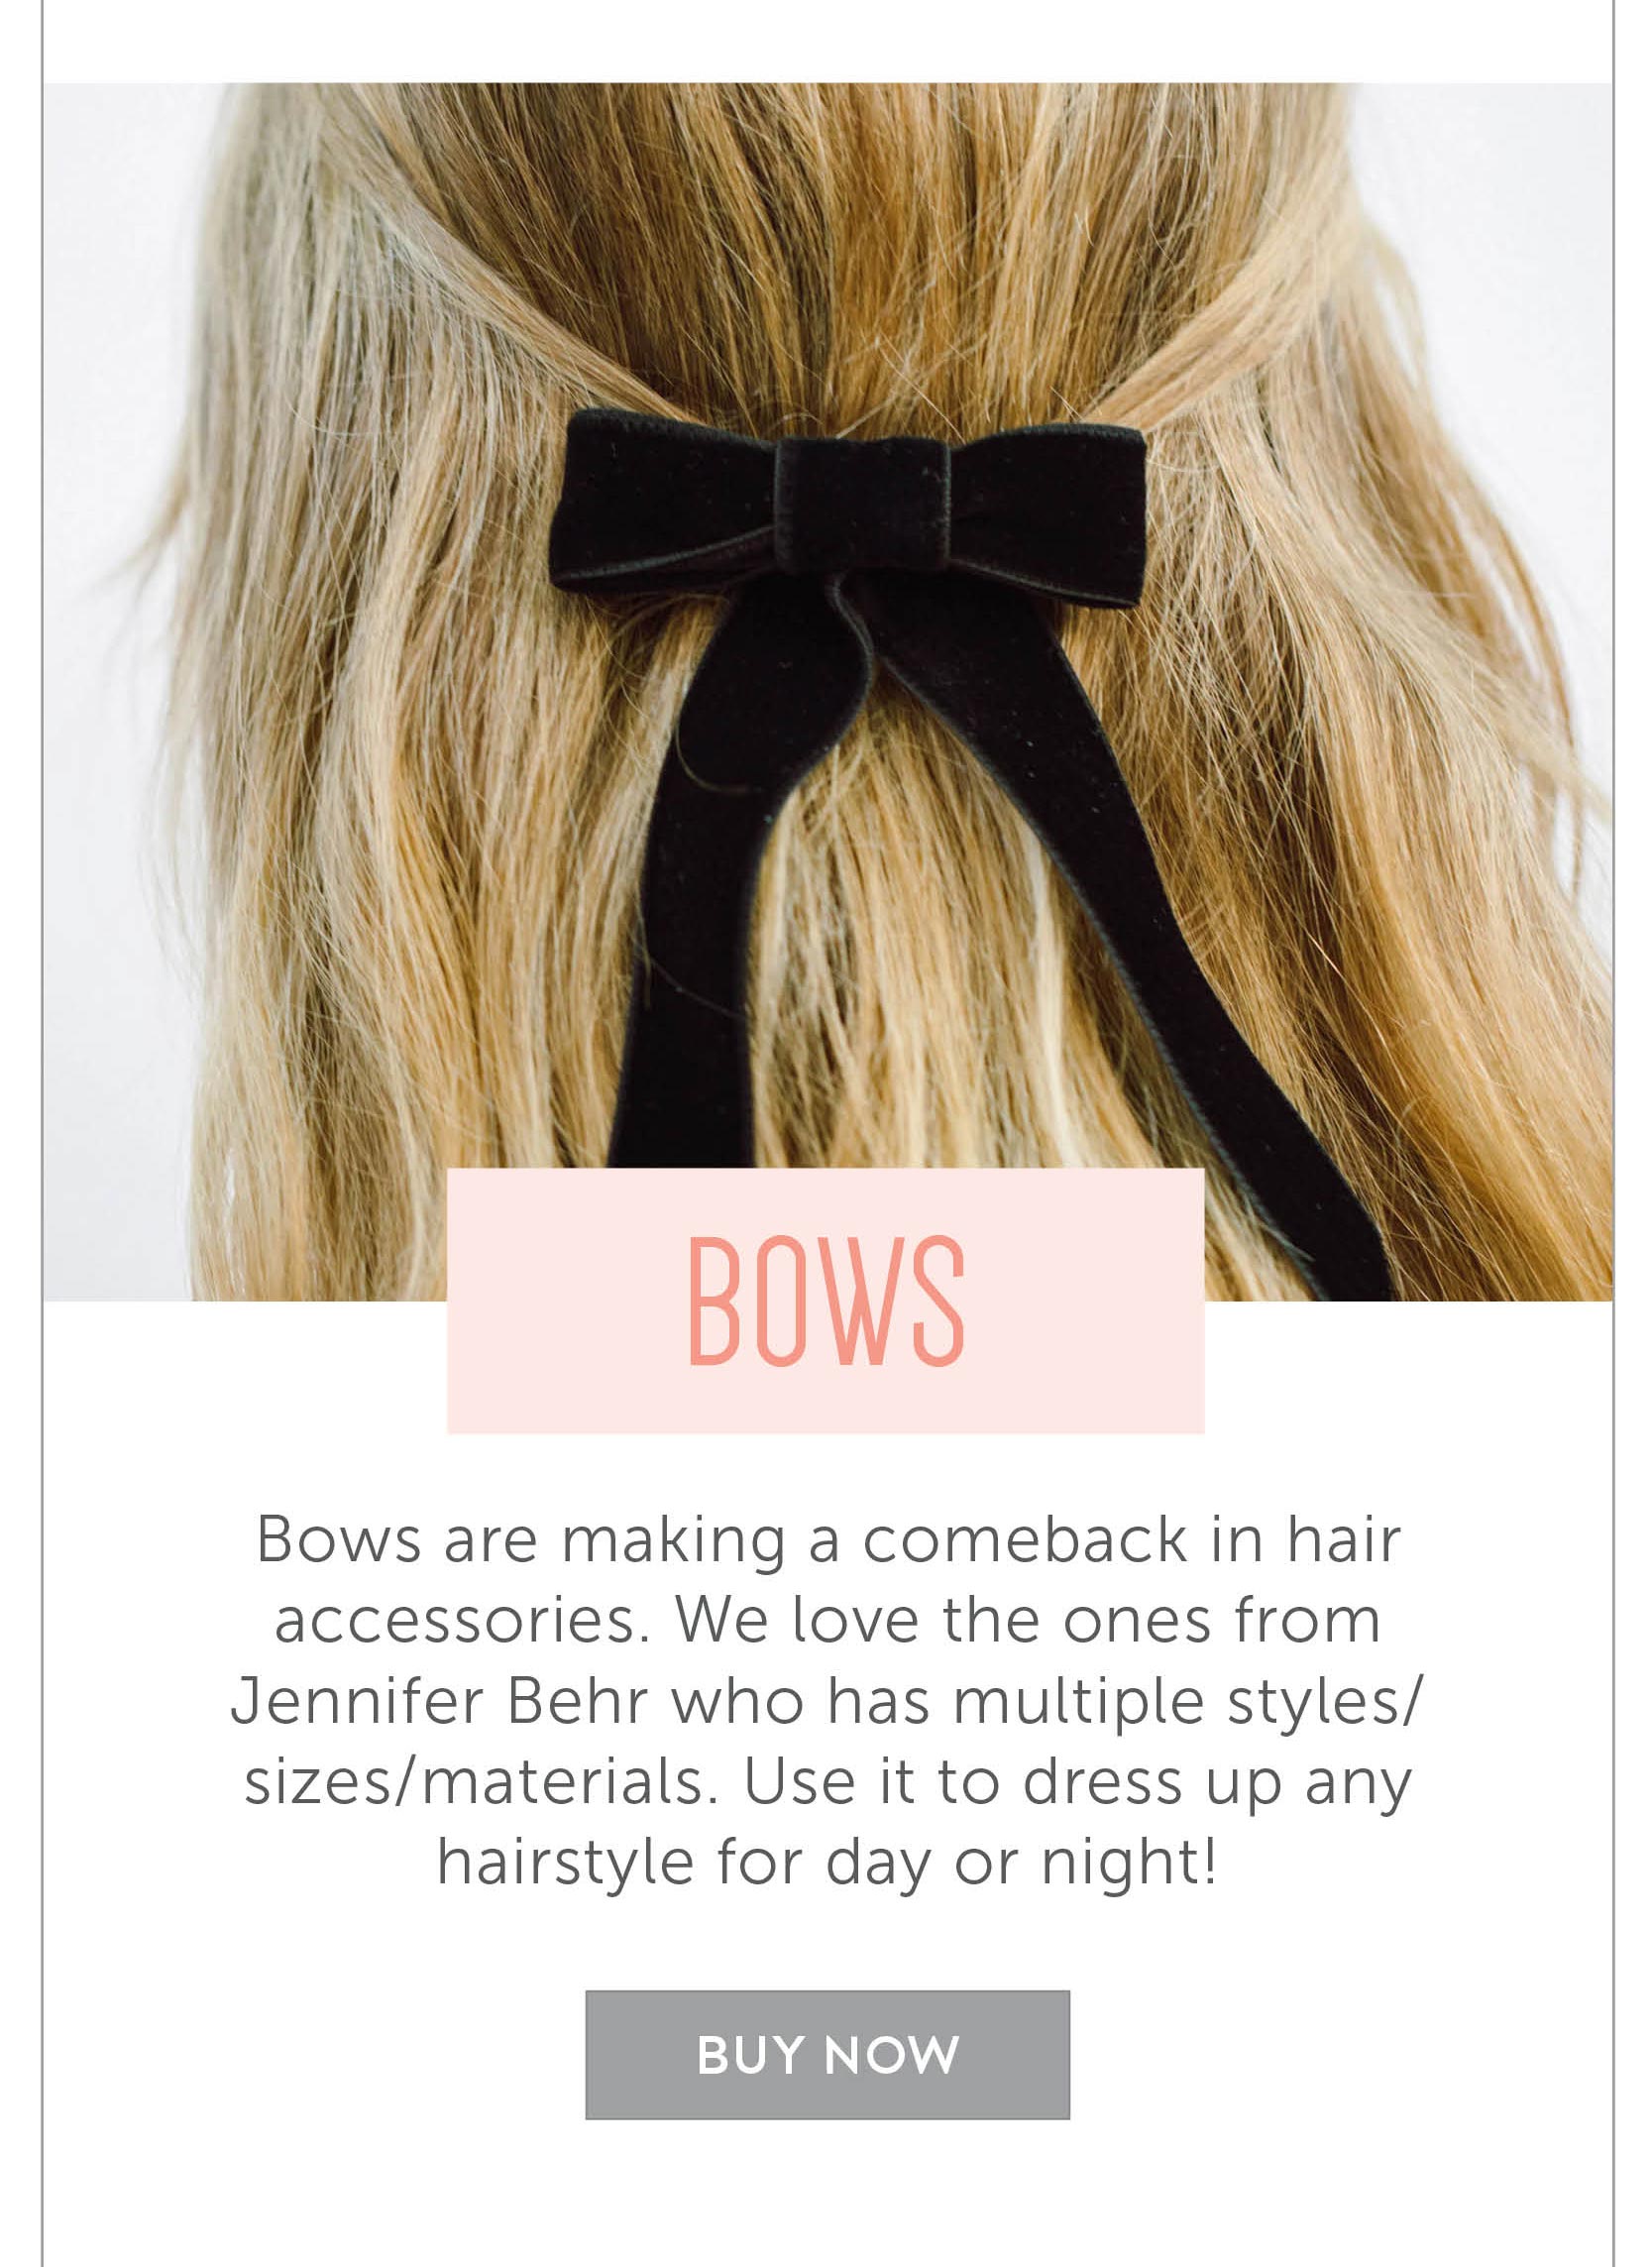 Bows! Bows are making a comeback in hair accessories. We love the ones from Jennifer Behr who has multiple styles/sizes/materials. Use it to dress up any hairstyle for day or night!